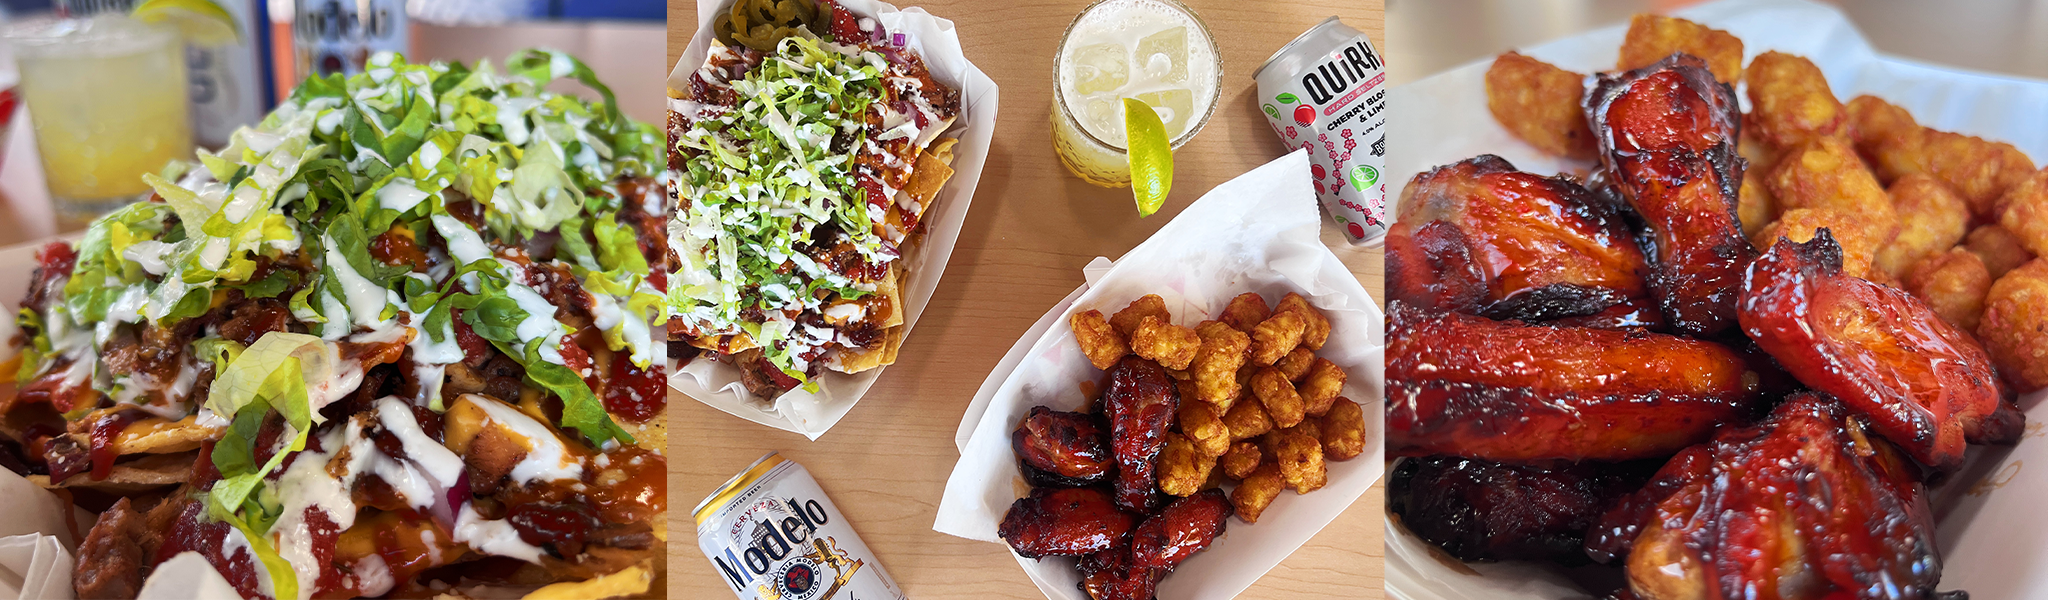 Aerial view of food on a blonde wood table. Nachos with a cream sauce drizzled on top, hot wings, and a can of beer.